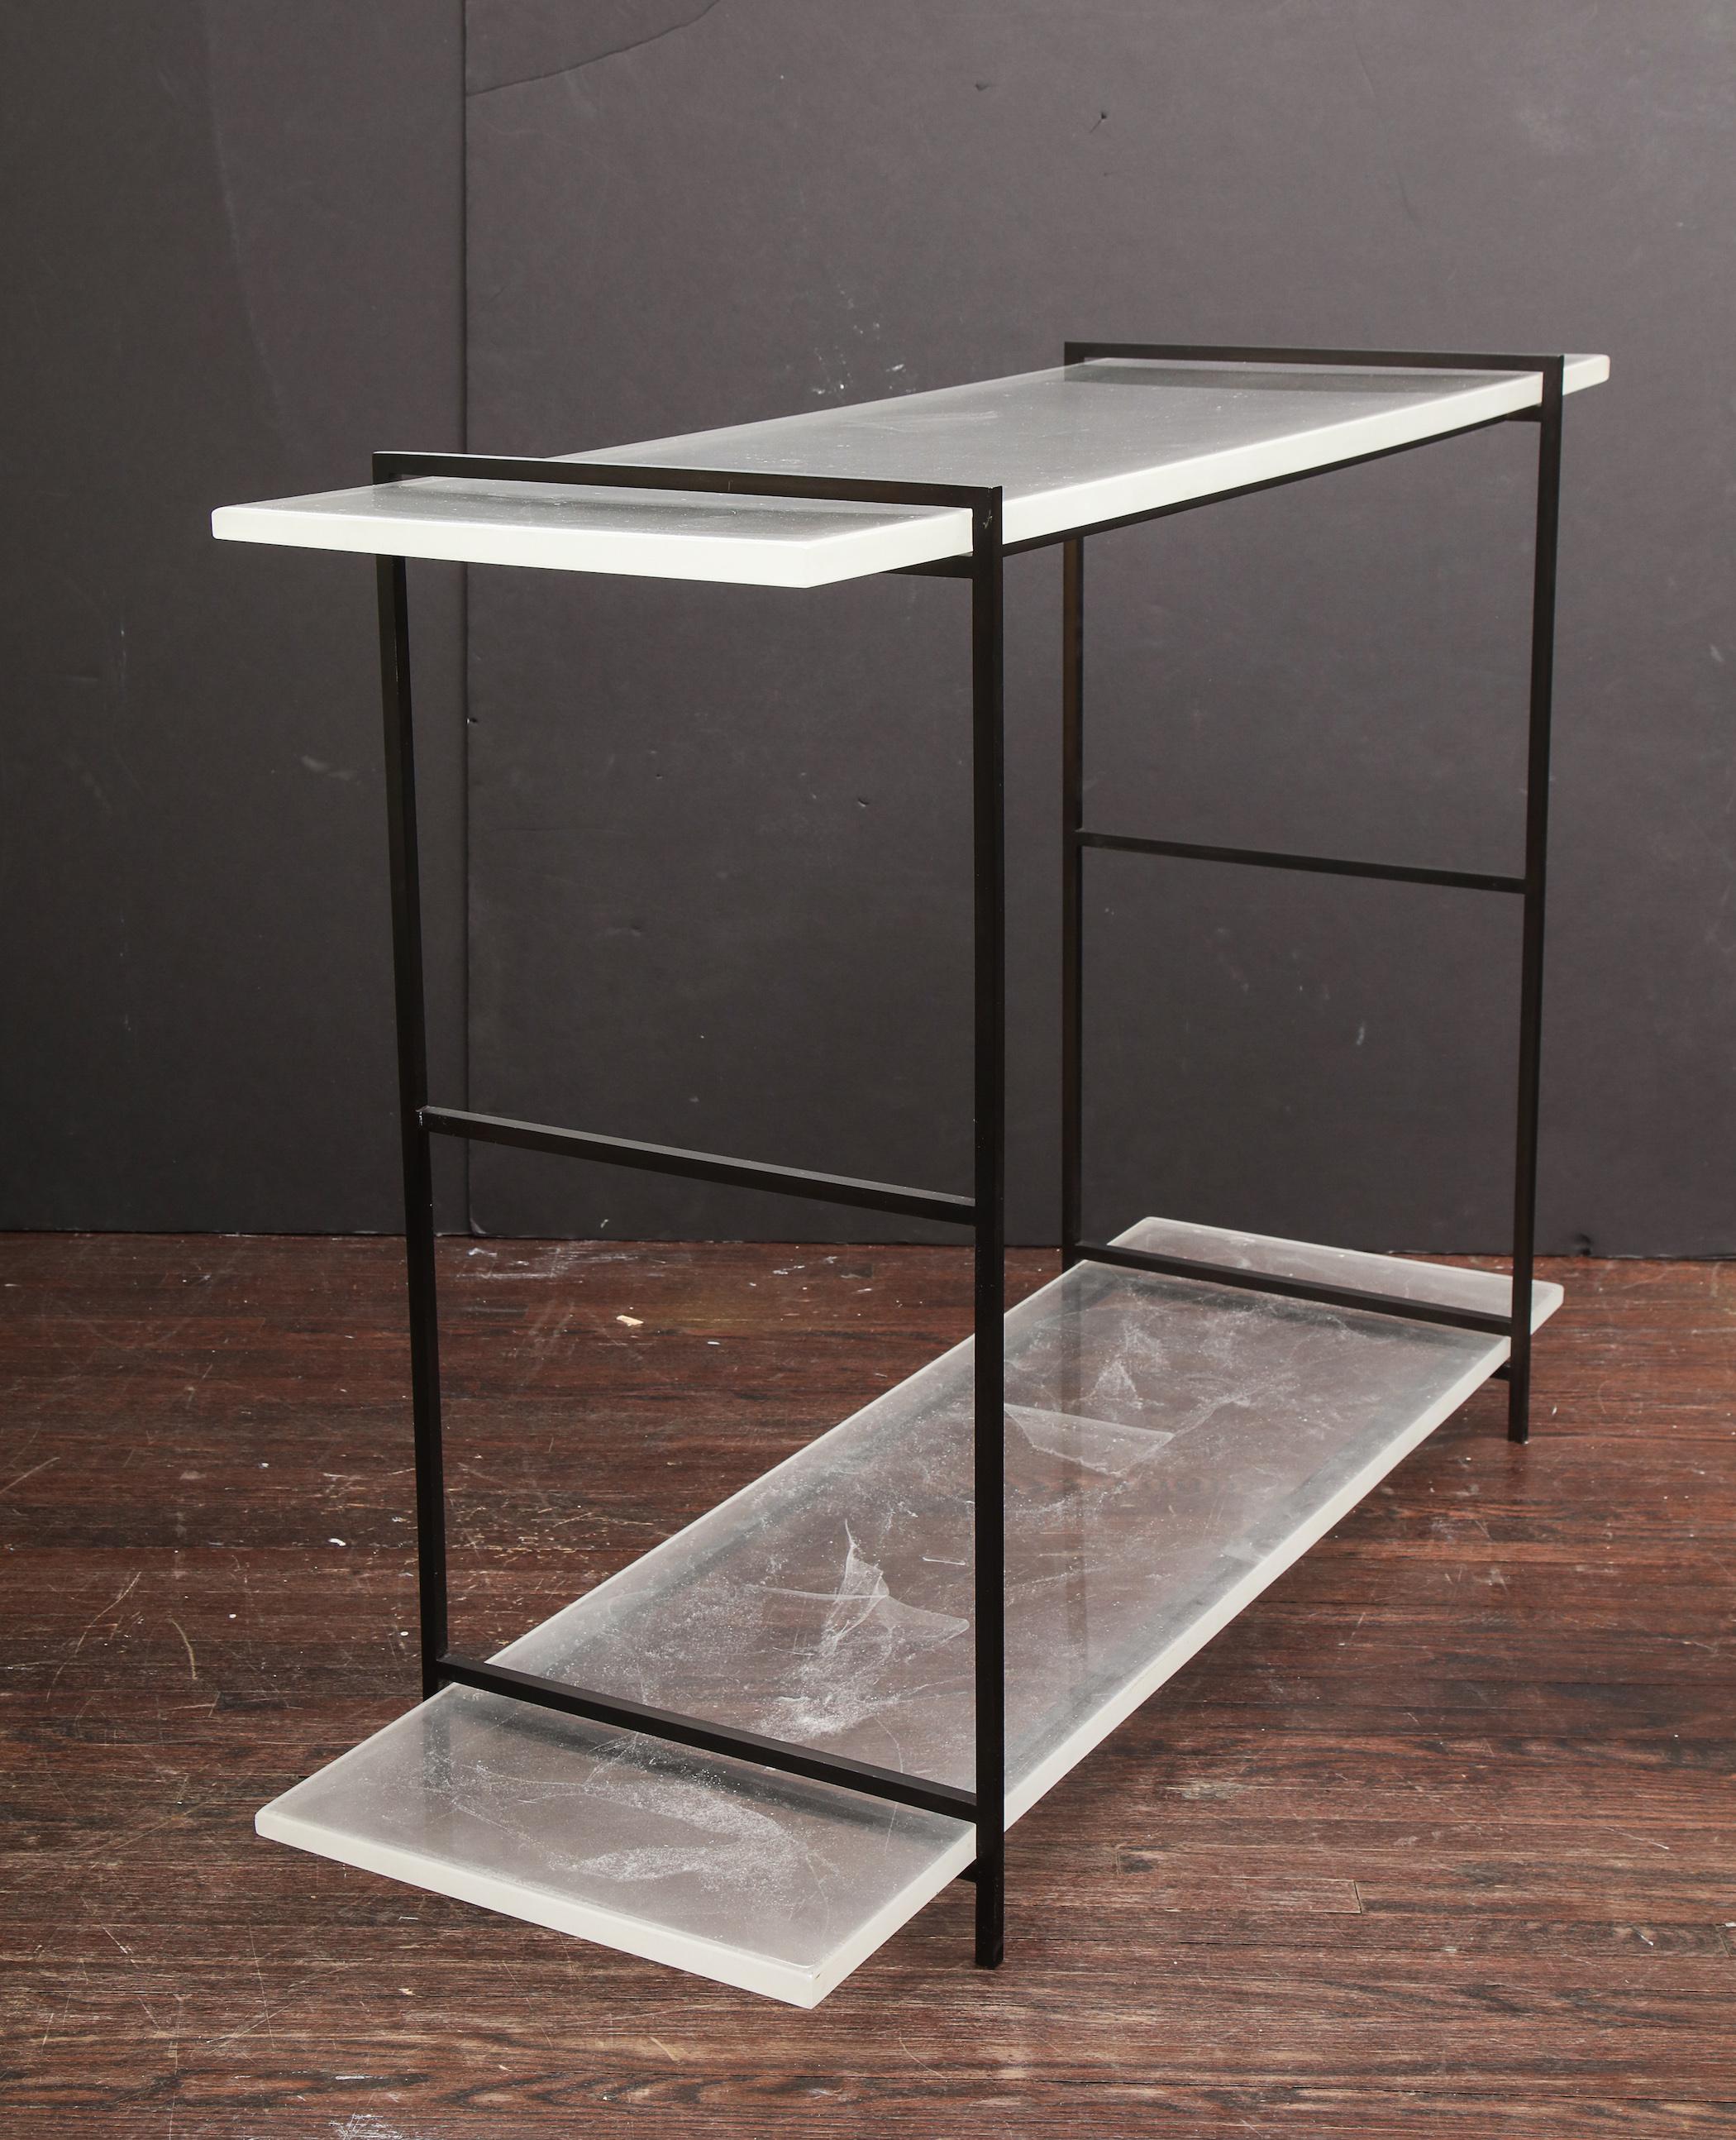 Novelty stardust glass console table with solid black metal legs. Each acrylic surfaces are infused with unique stardust-like texture that makes a contrast to the simple smooth black metal legs. The top surface is at 33-1/2